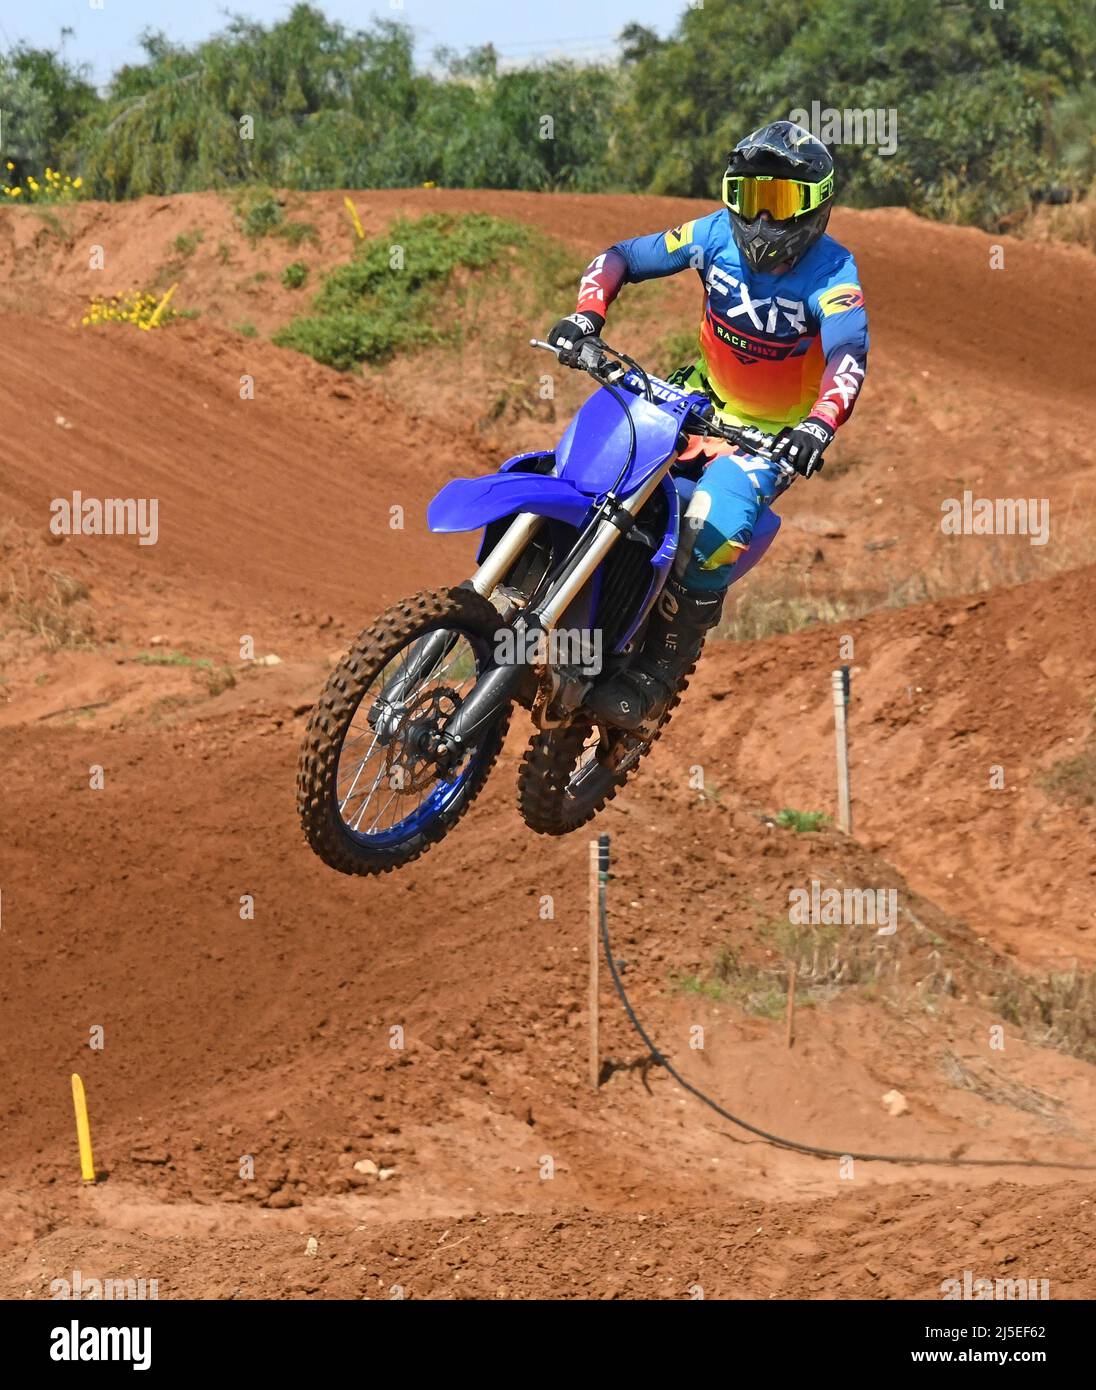 Motorcycle race - Jump, extreme sport Stock Photo